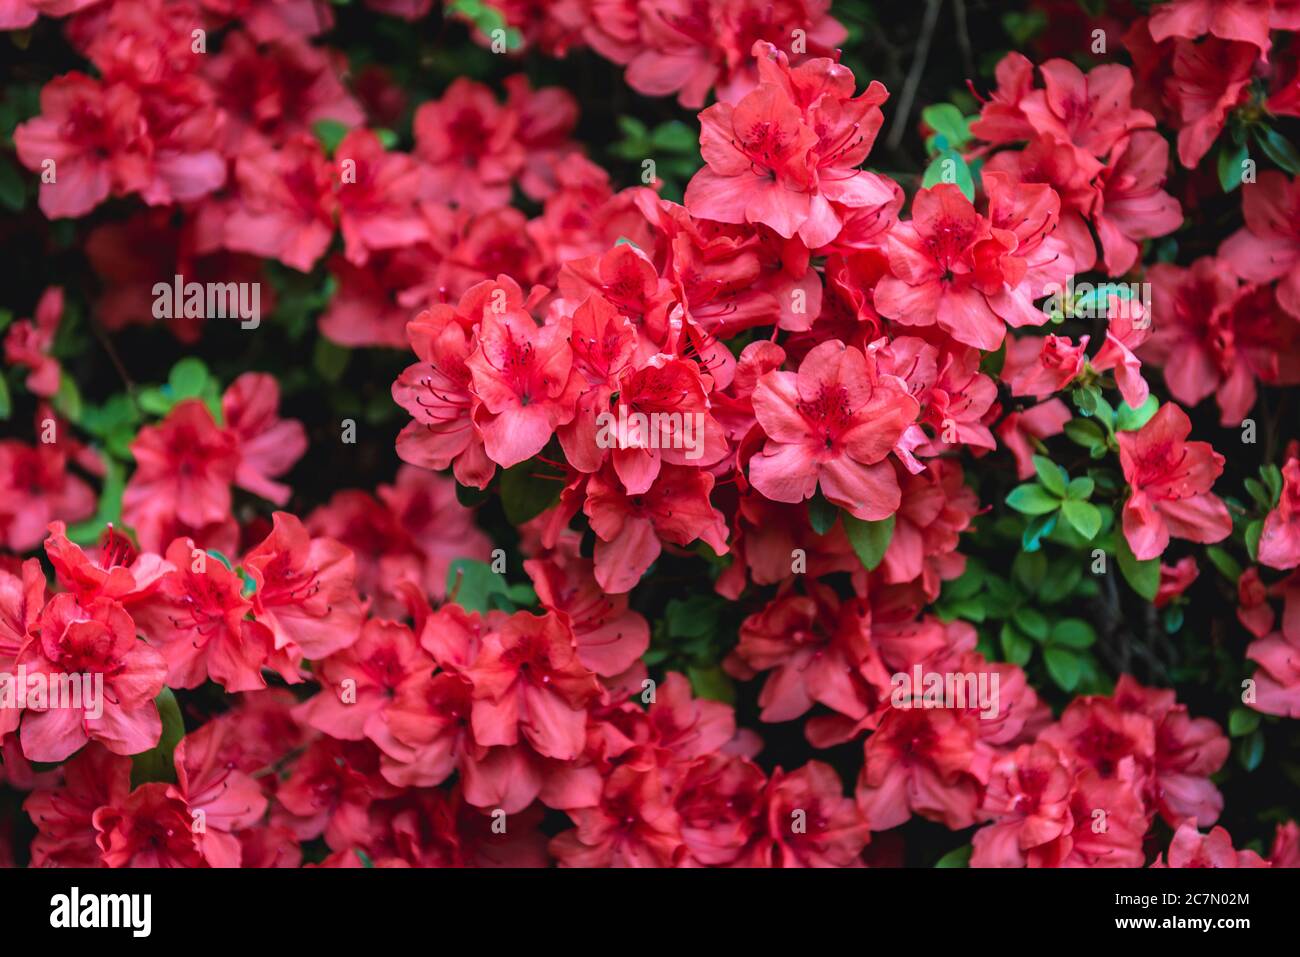 Rhododendron flowers variety called Glowing Embers Stock Photo